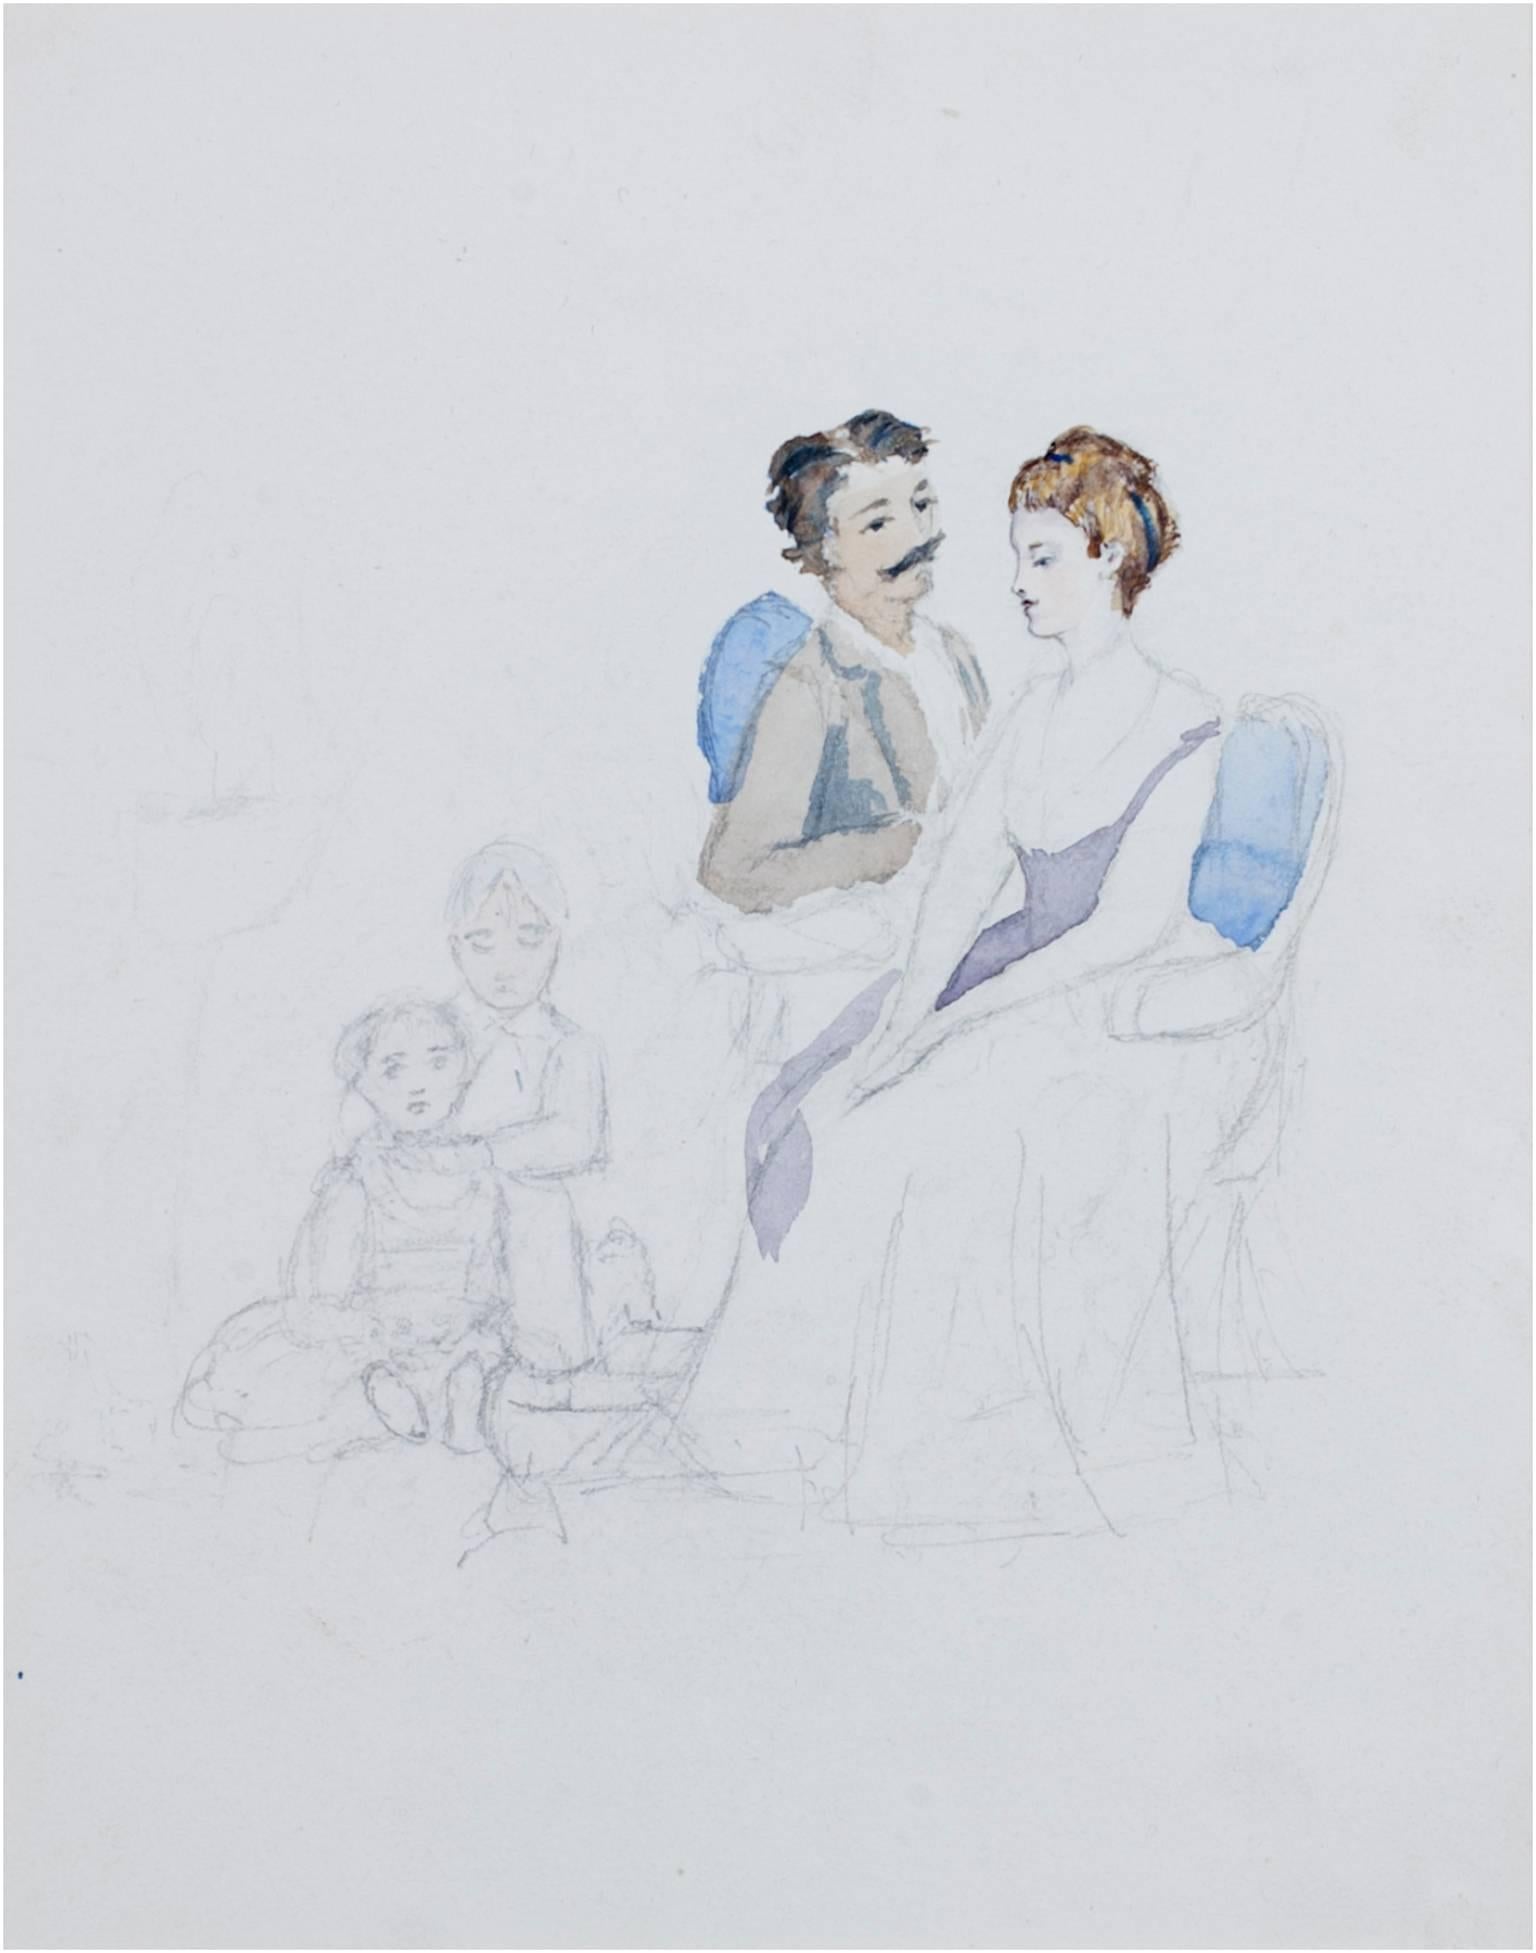 Hannah de Rothschild Figurative Art - "Couple with Two Children" Original Watercolor & Pencil Drawing by H. Rothschild